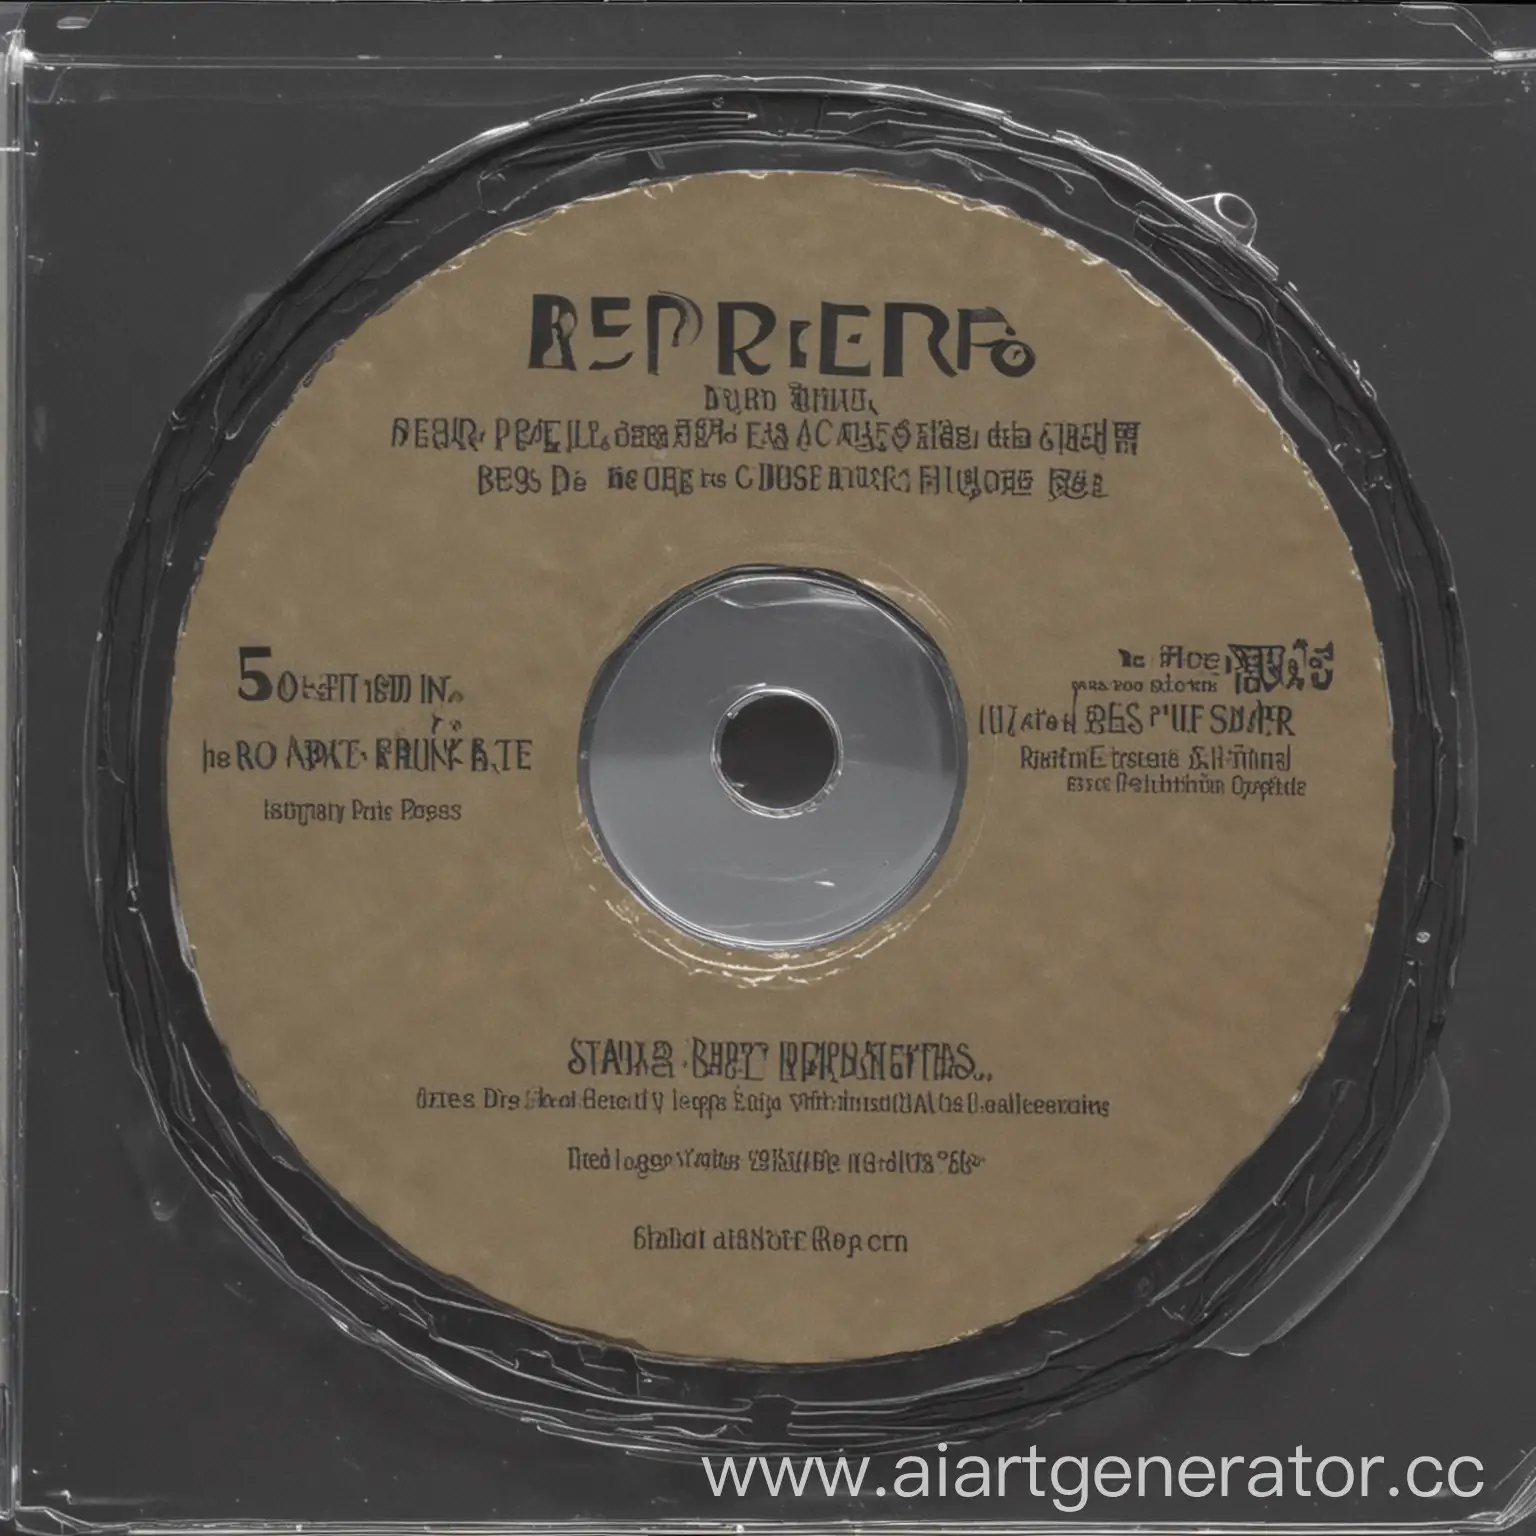 Circular-CD-with-EEPEE-and-RRR-Text